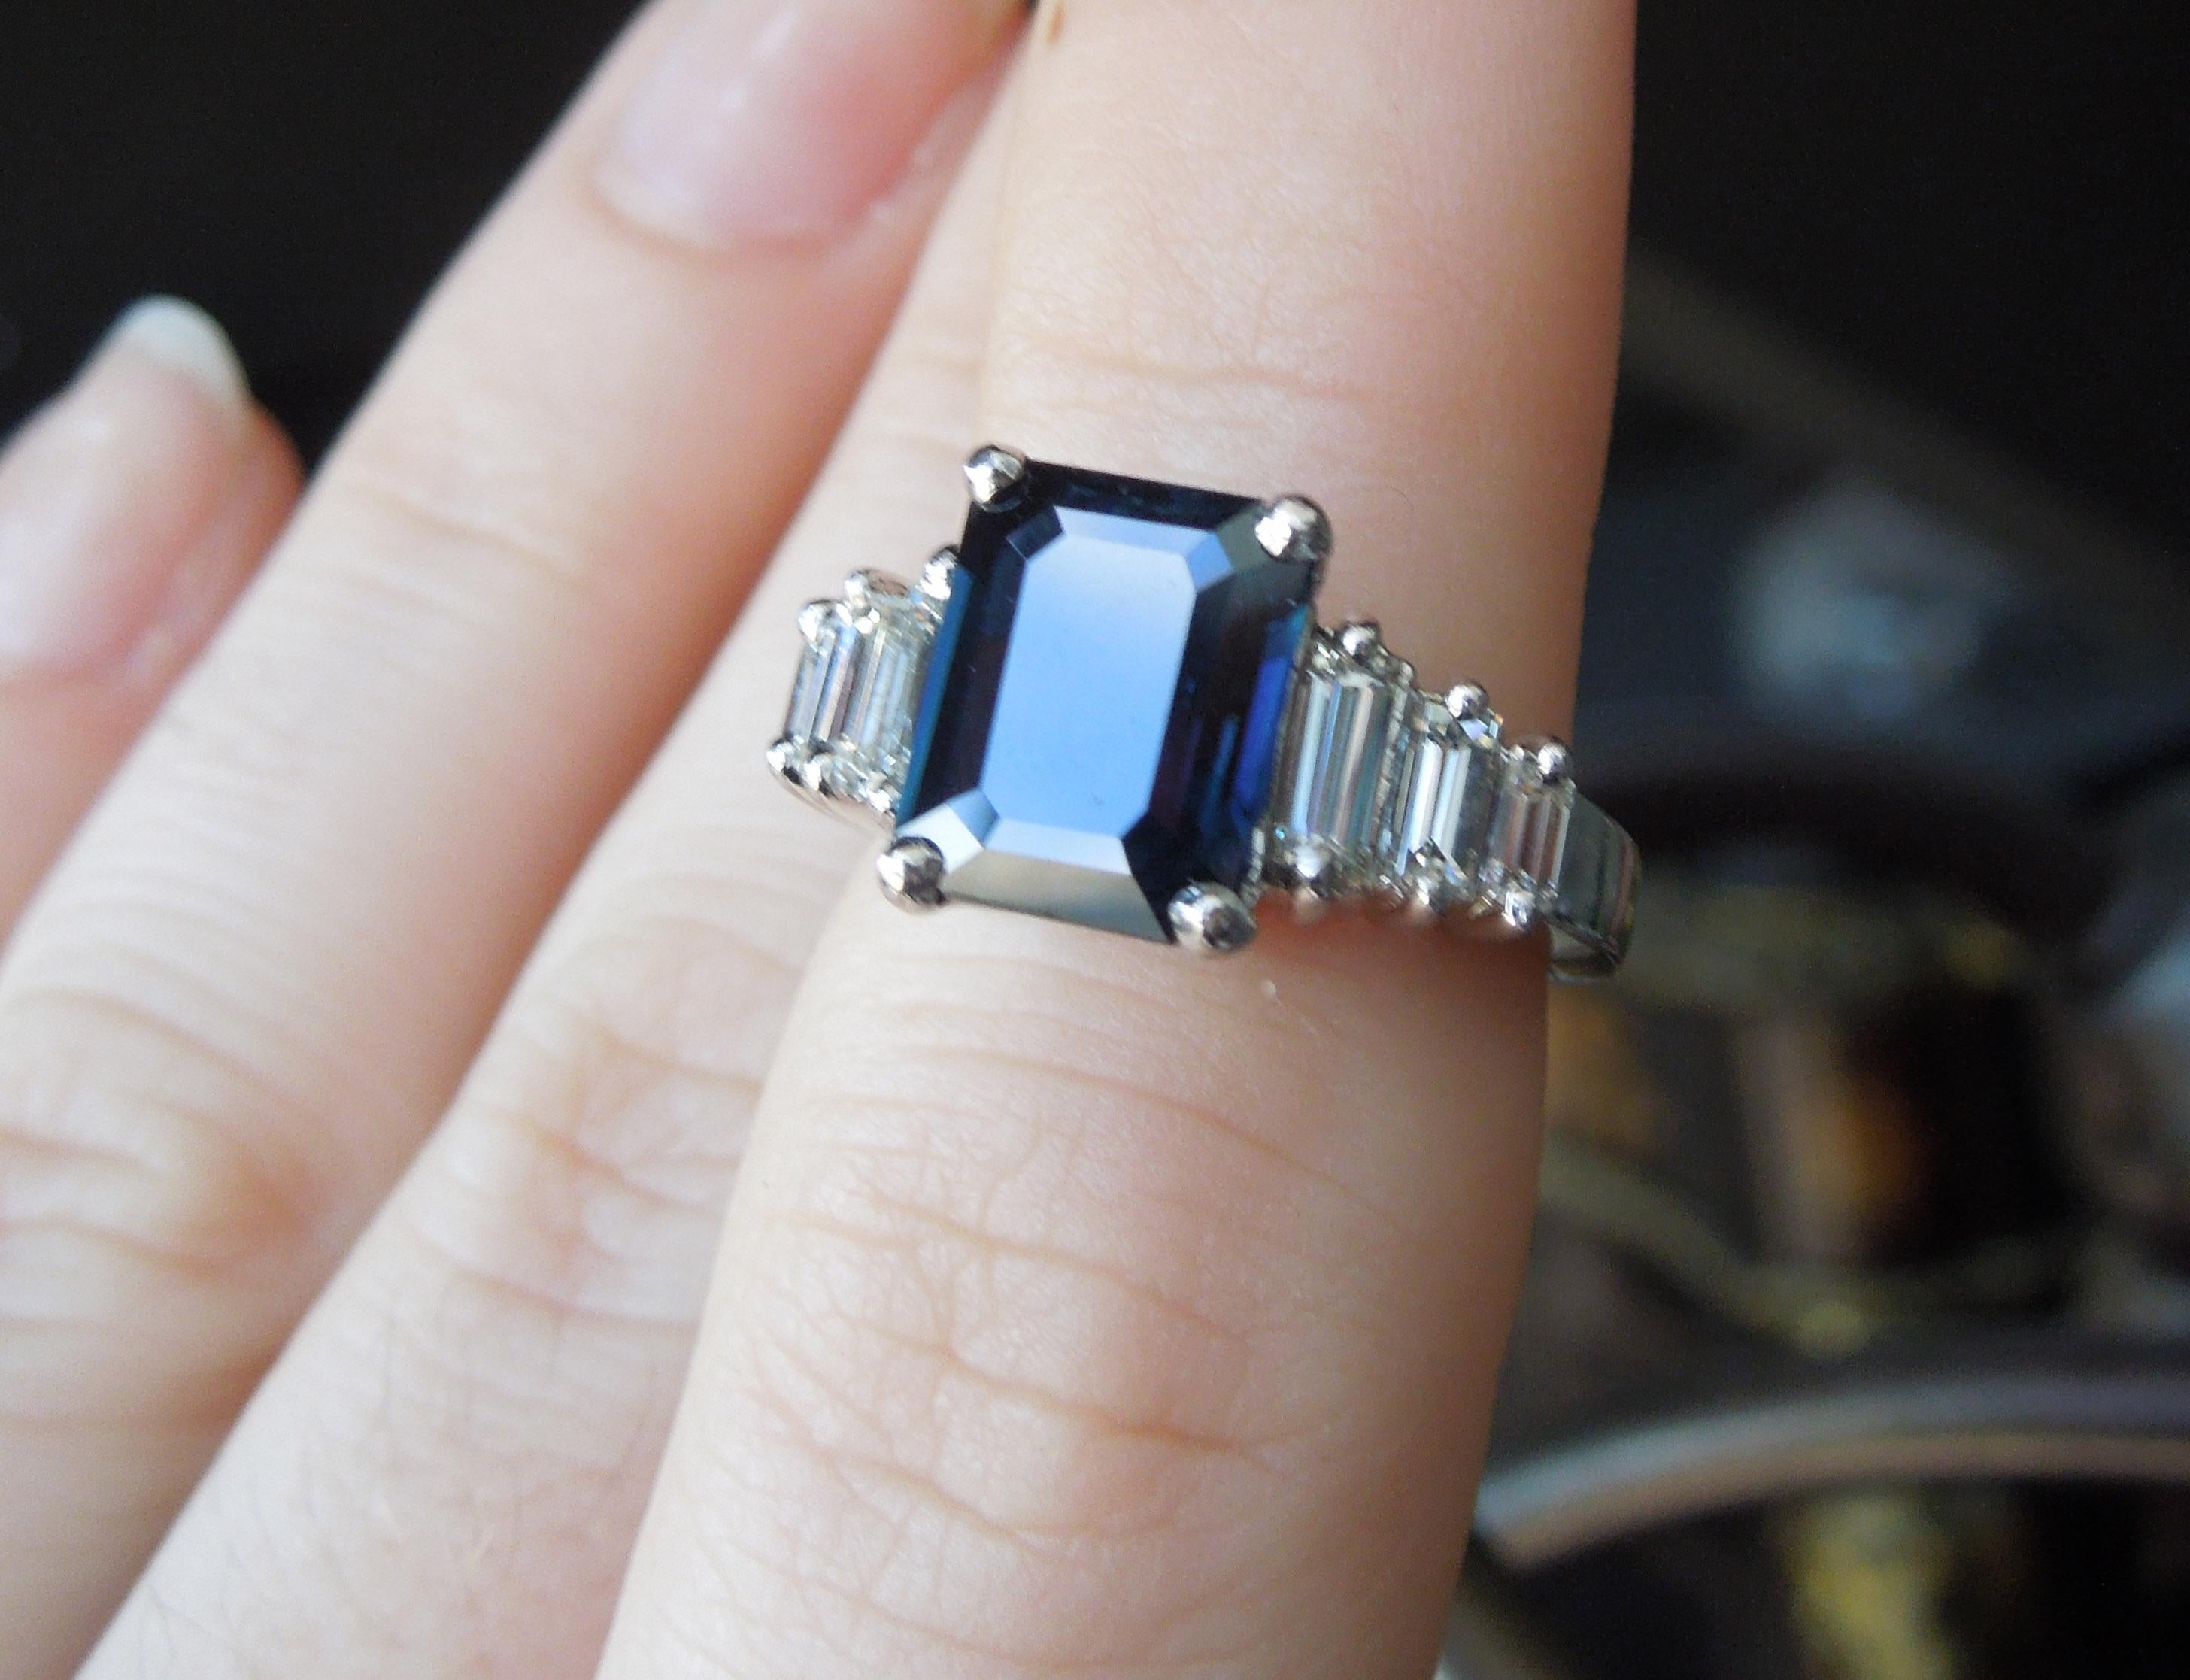 Featuring a central 4 carat Emerald cut Blue Sapphire, with a slight Green tinge, at 9.5mm in length x 7.5mm in width, secured in a 4-Prong setting. With a total of approximately 0.90 carats of Colorless Nearly Flawless Rectangular Baguette cut